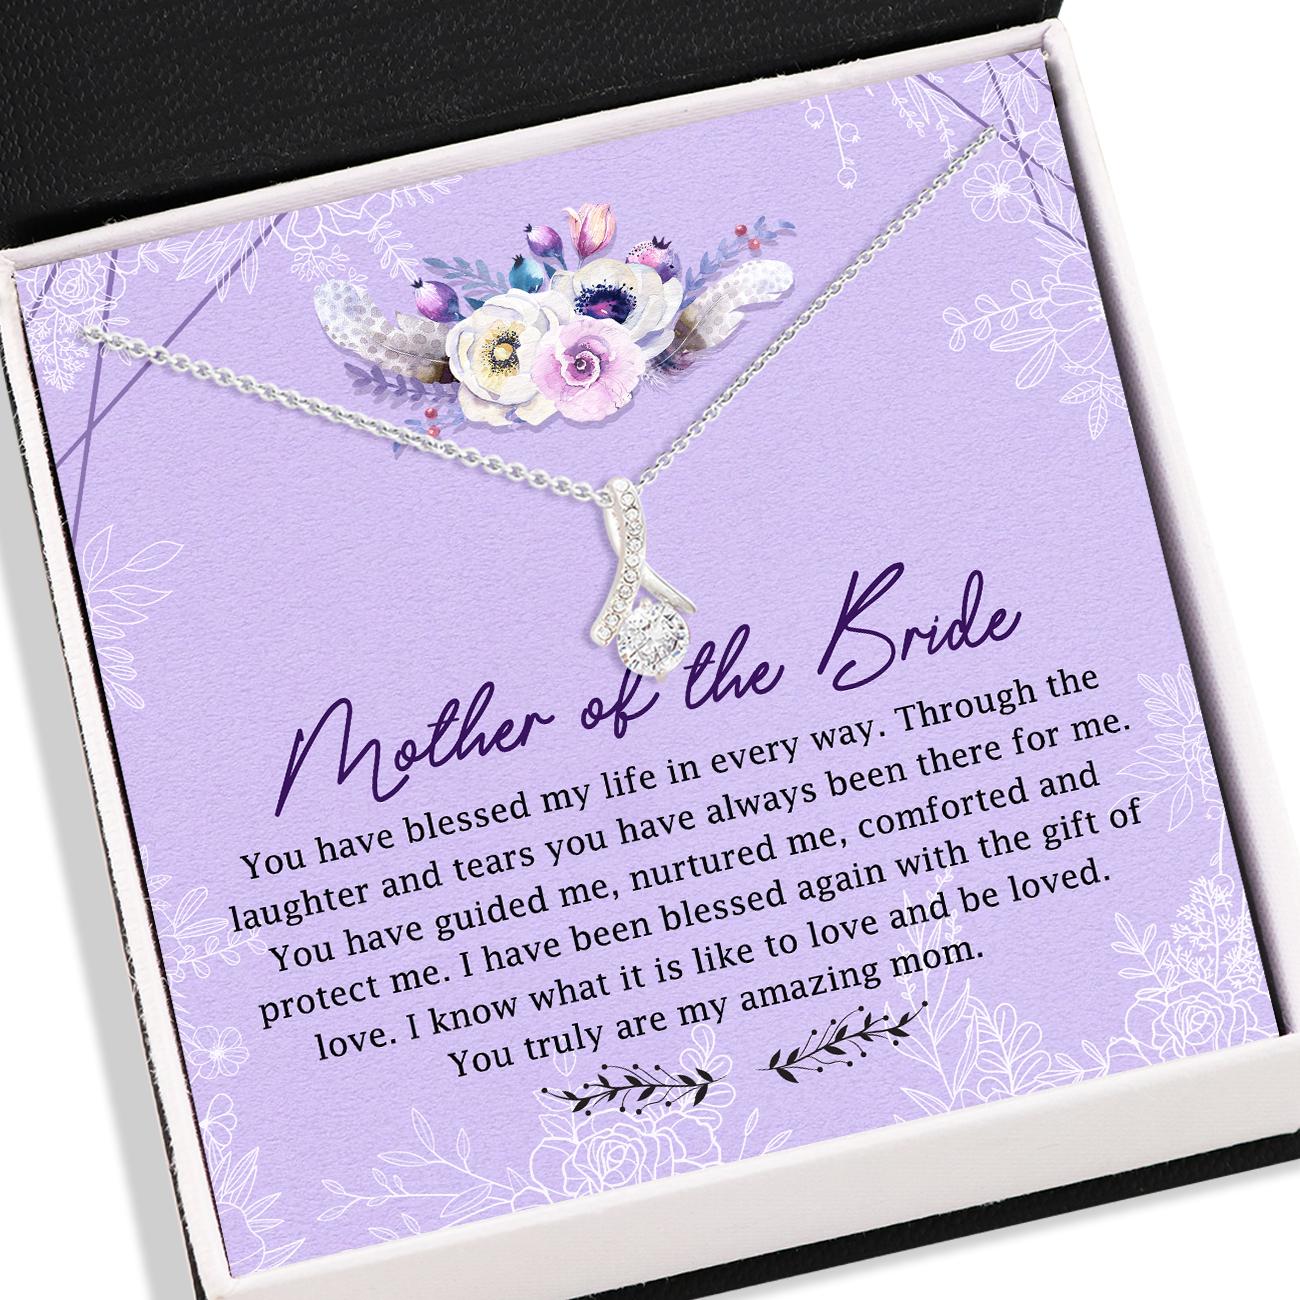 Mom Necklace, Mother Of The Bride Necklace Card - Alluring Beauty Necklace - Mother Of The Bride Gifts